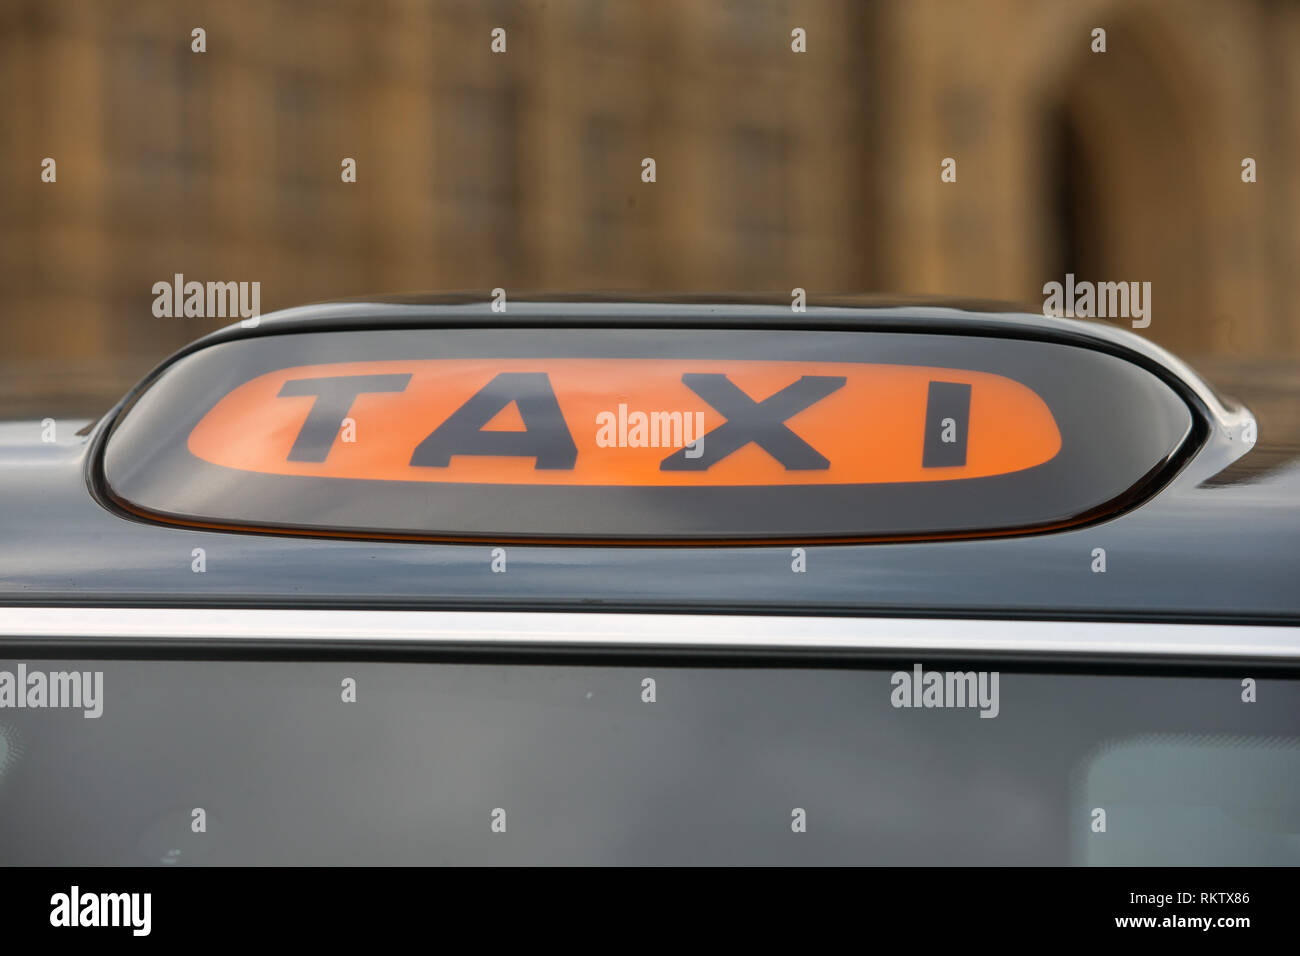 A modern Taxi light on top of an electric black cab. Stock Photo